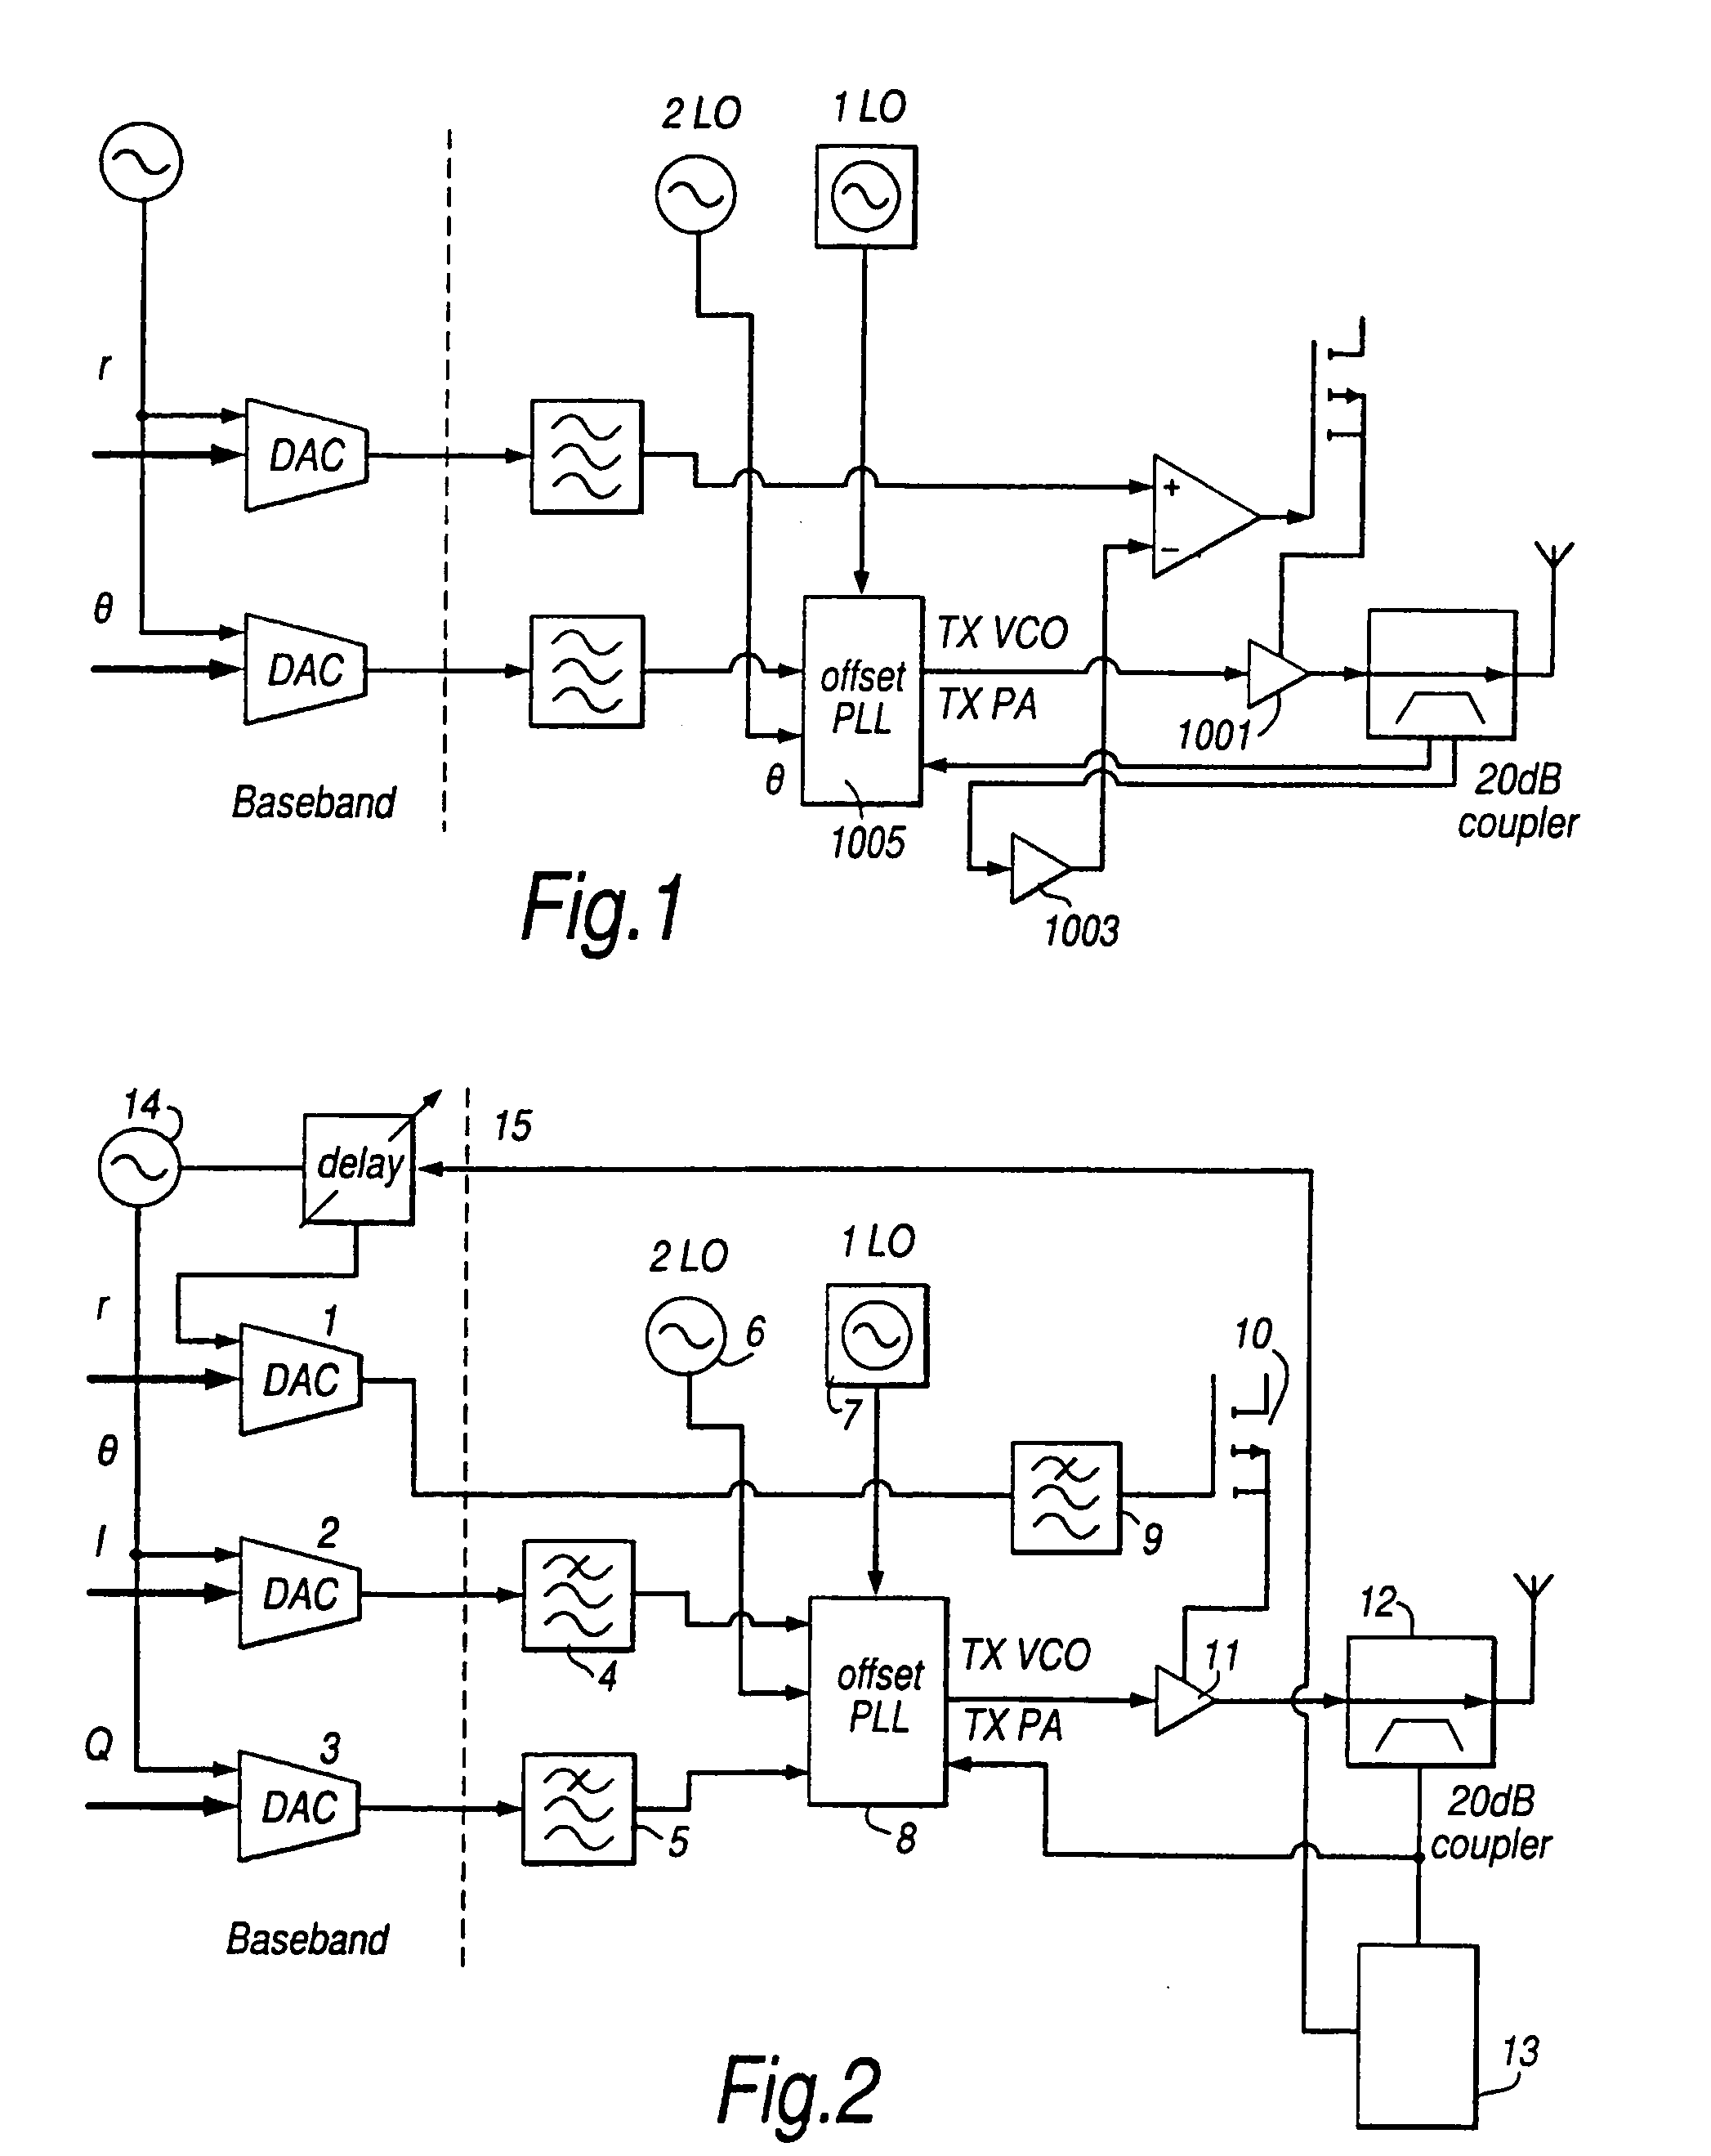 Linear RF power amplifier and transmitter